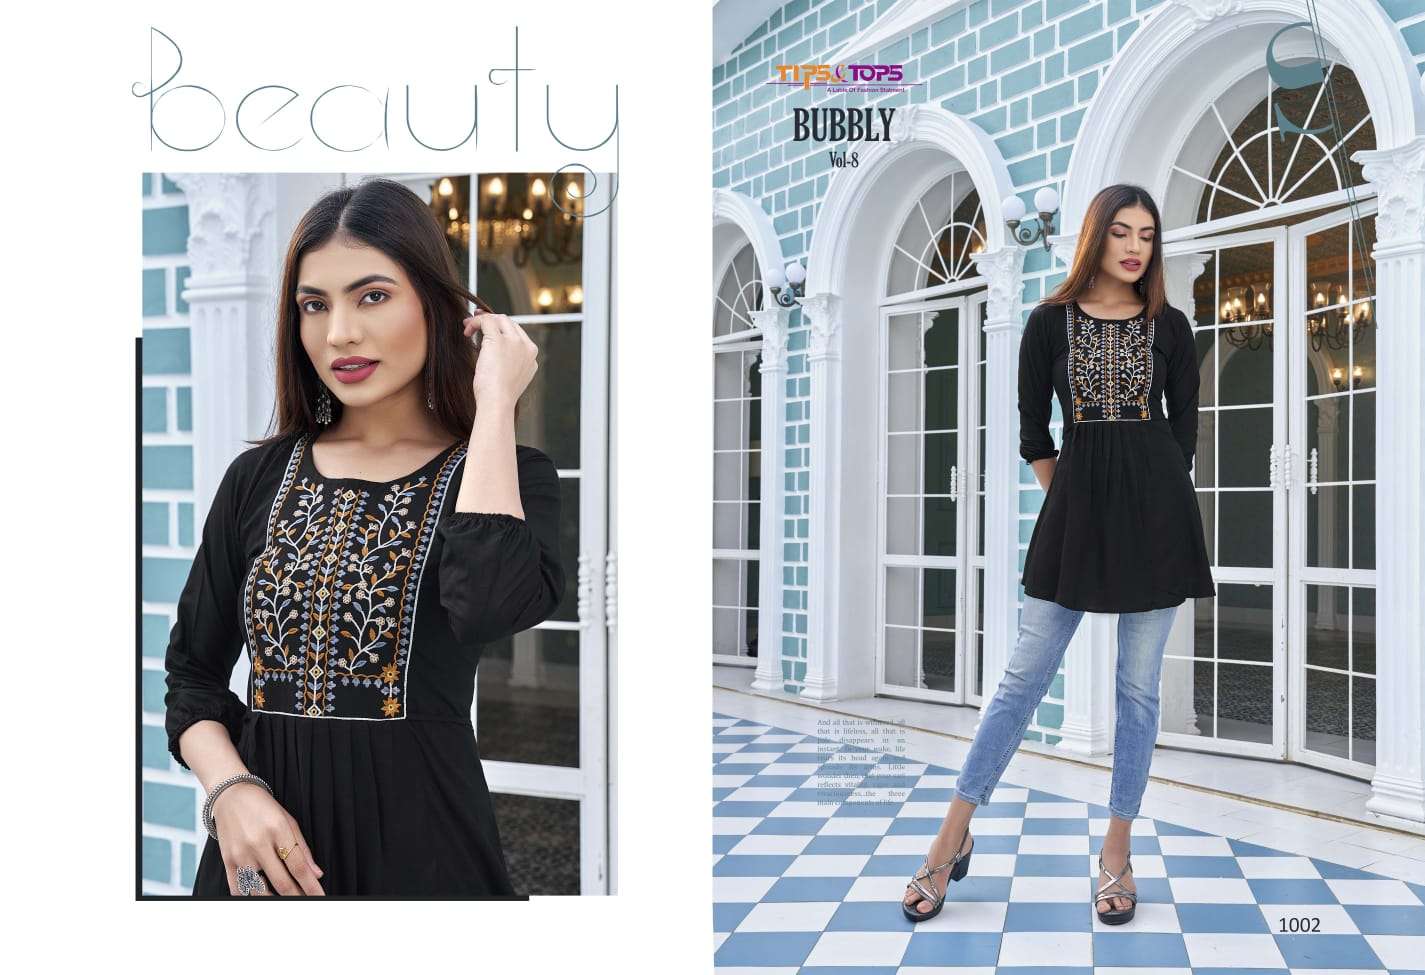 tips&tops bubbly vol-8 heavy rayon fancy short kurtis collection surat